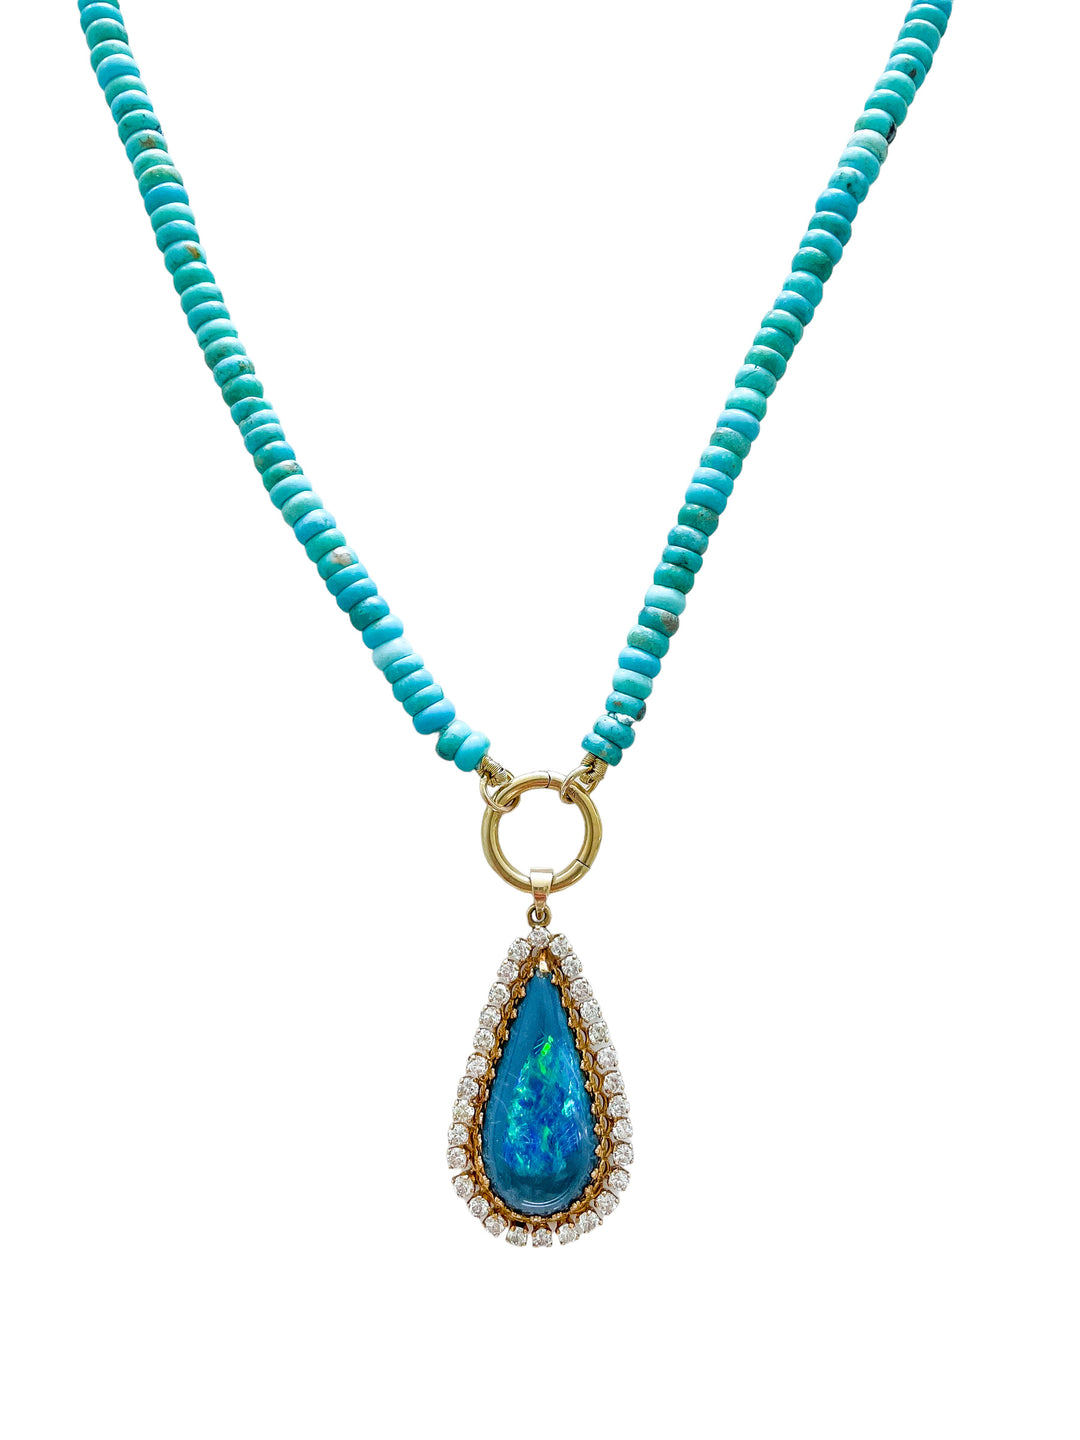 One of a kind Opal Diamond Turquoise Necklace